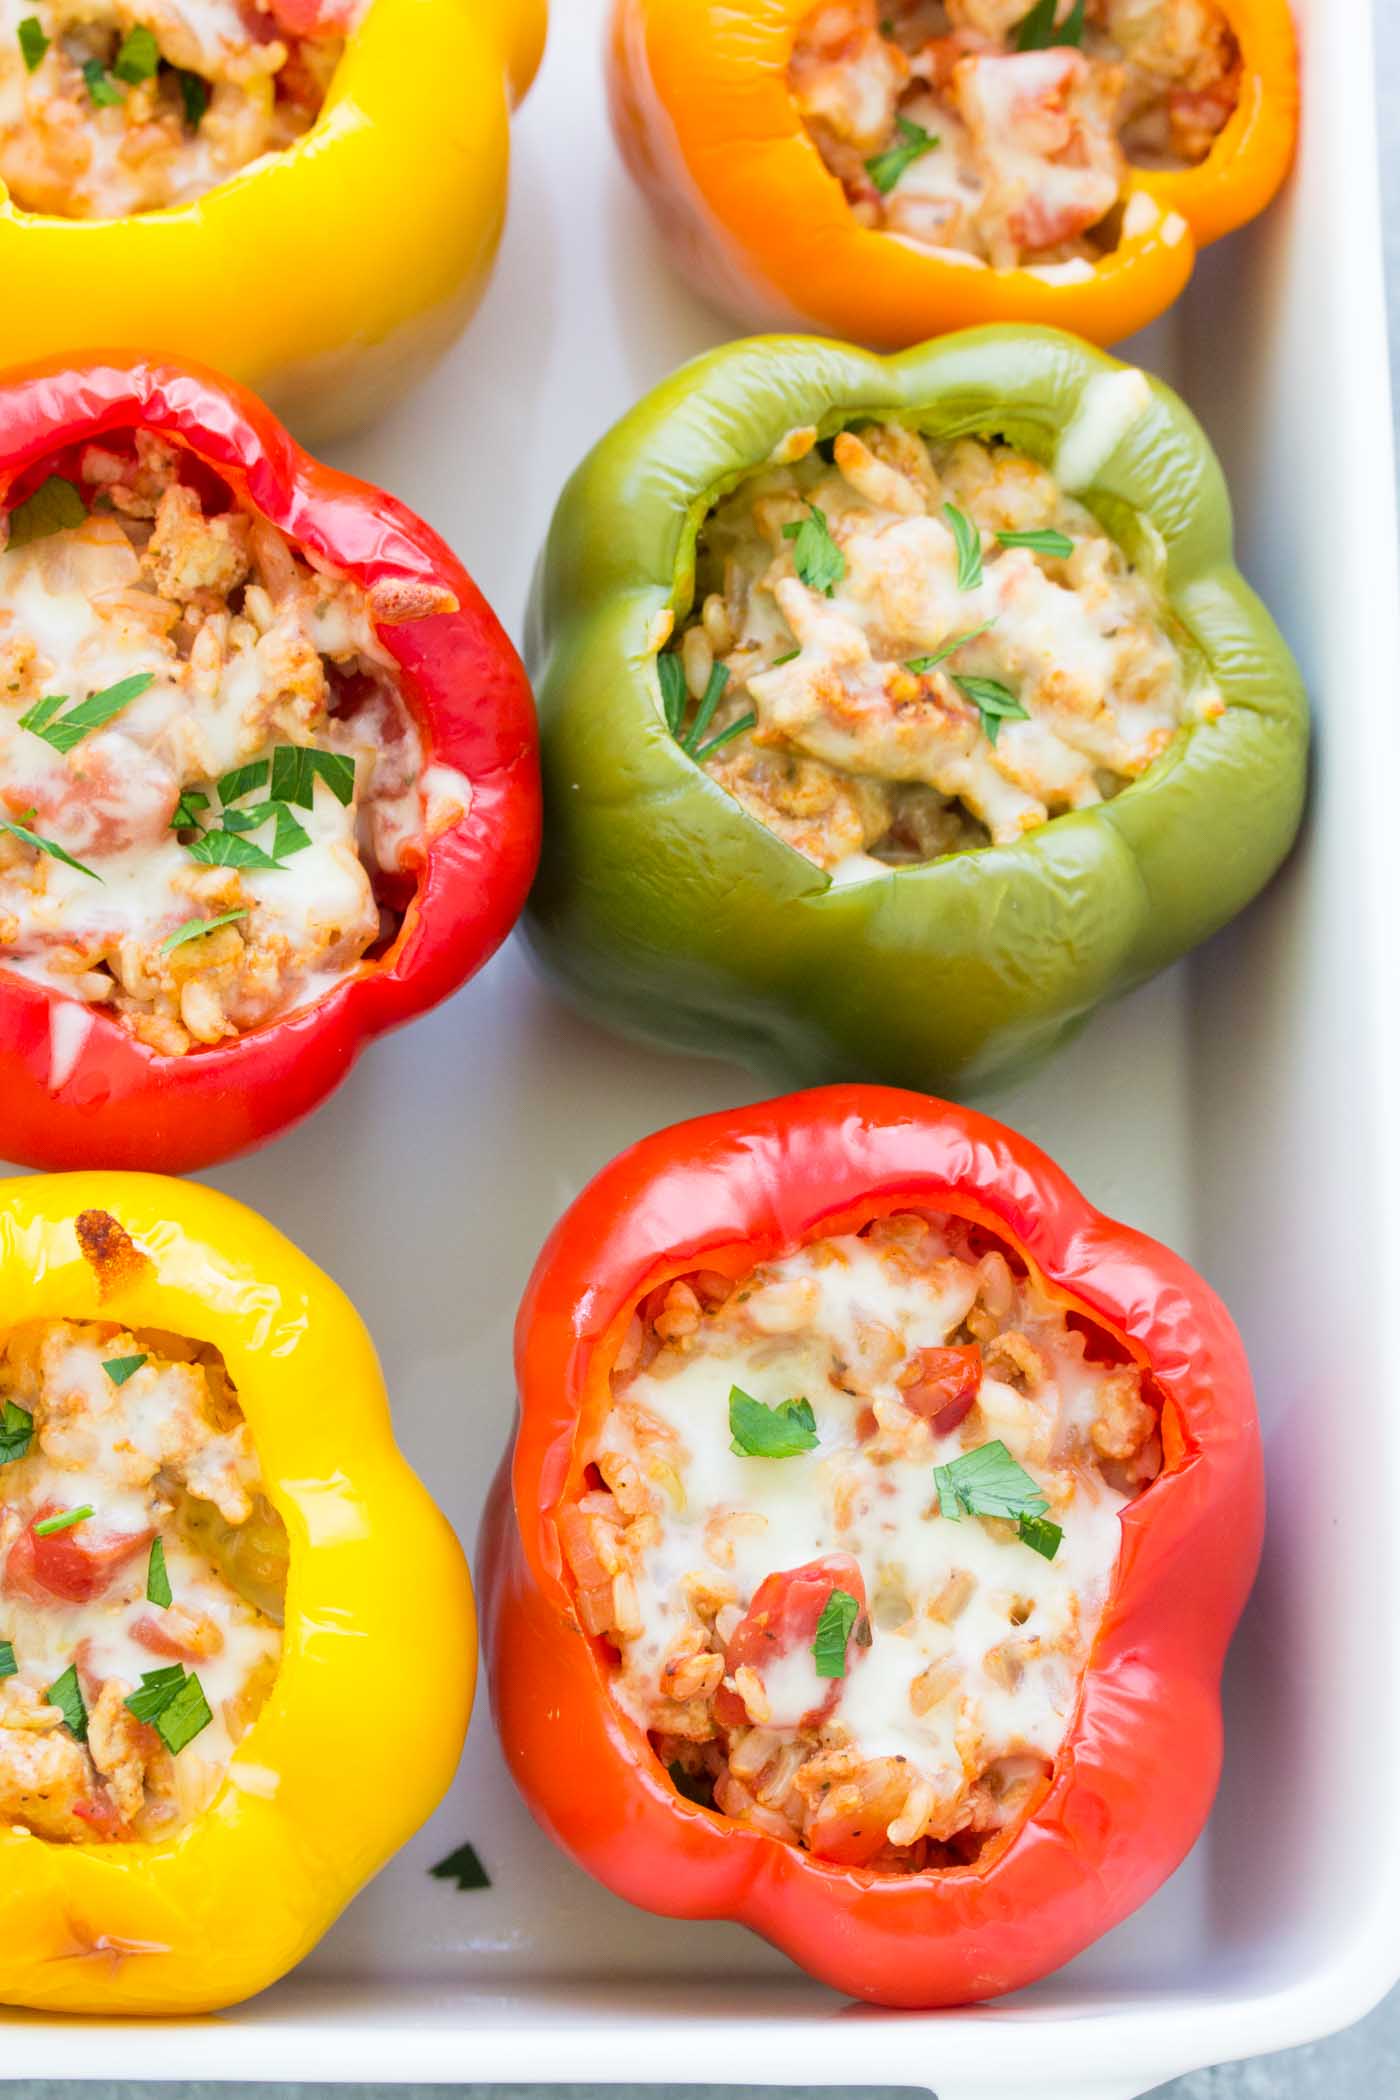 Stuffed bell peppers made with ground turkey in a baking dish.